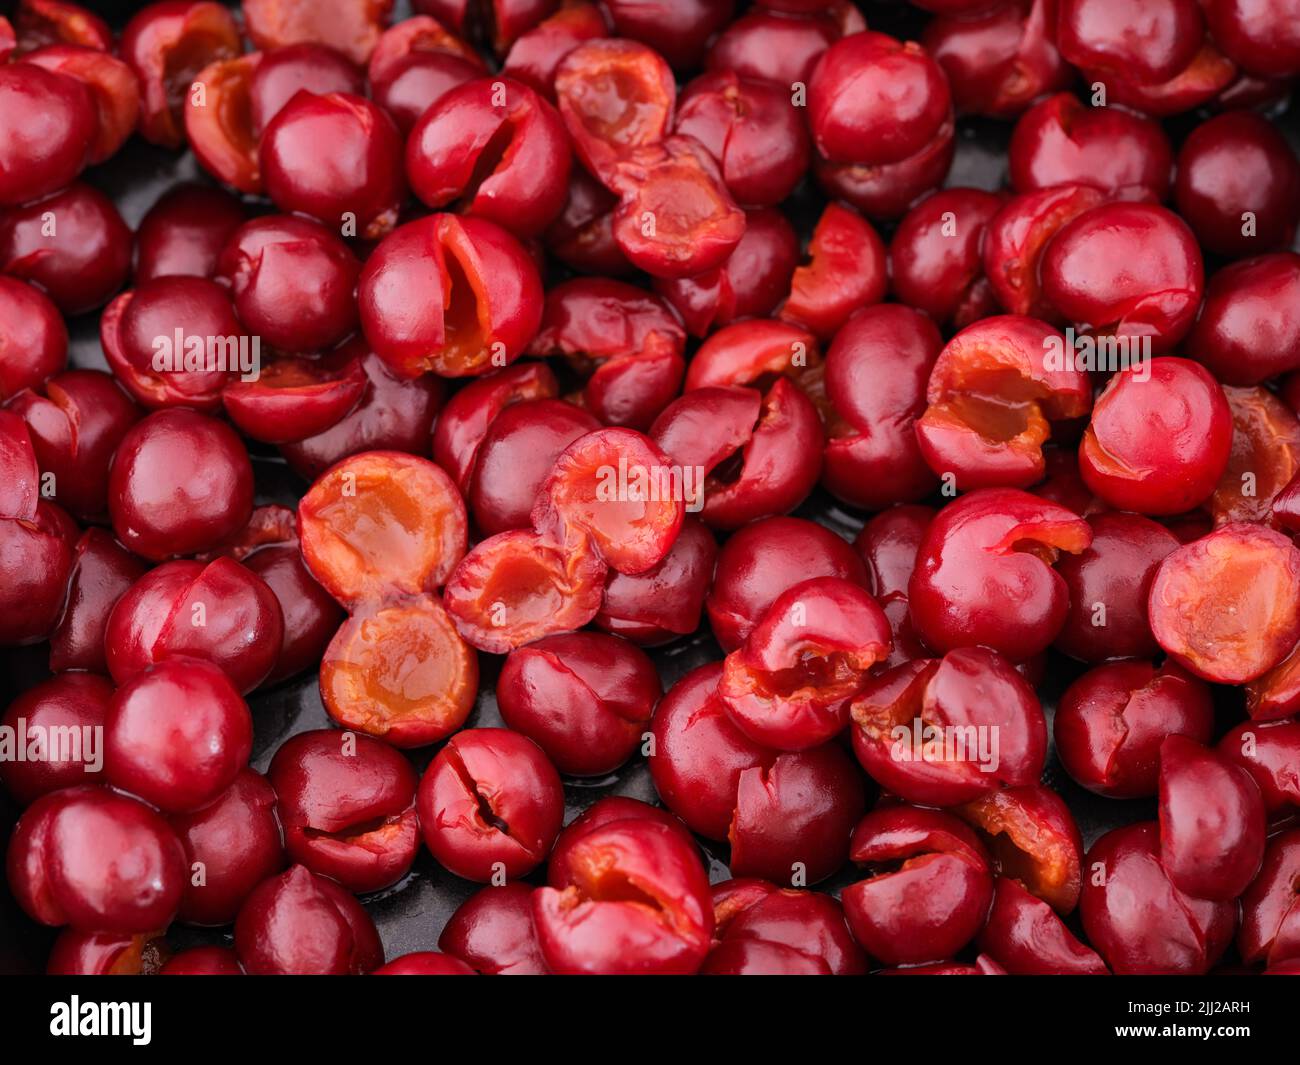 A lot of pitted cherries on a baking tray. Full frame Stock Photo